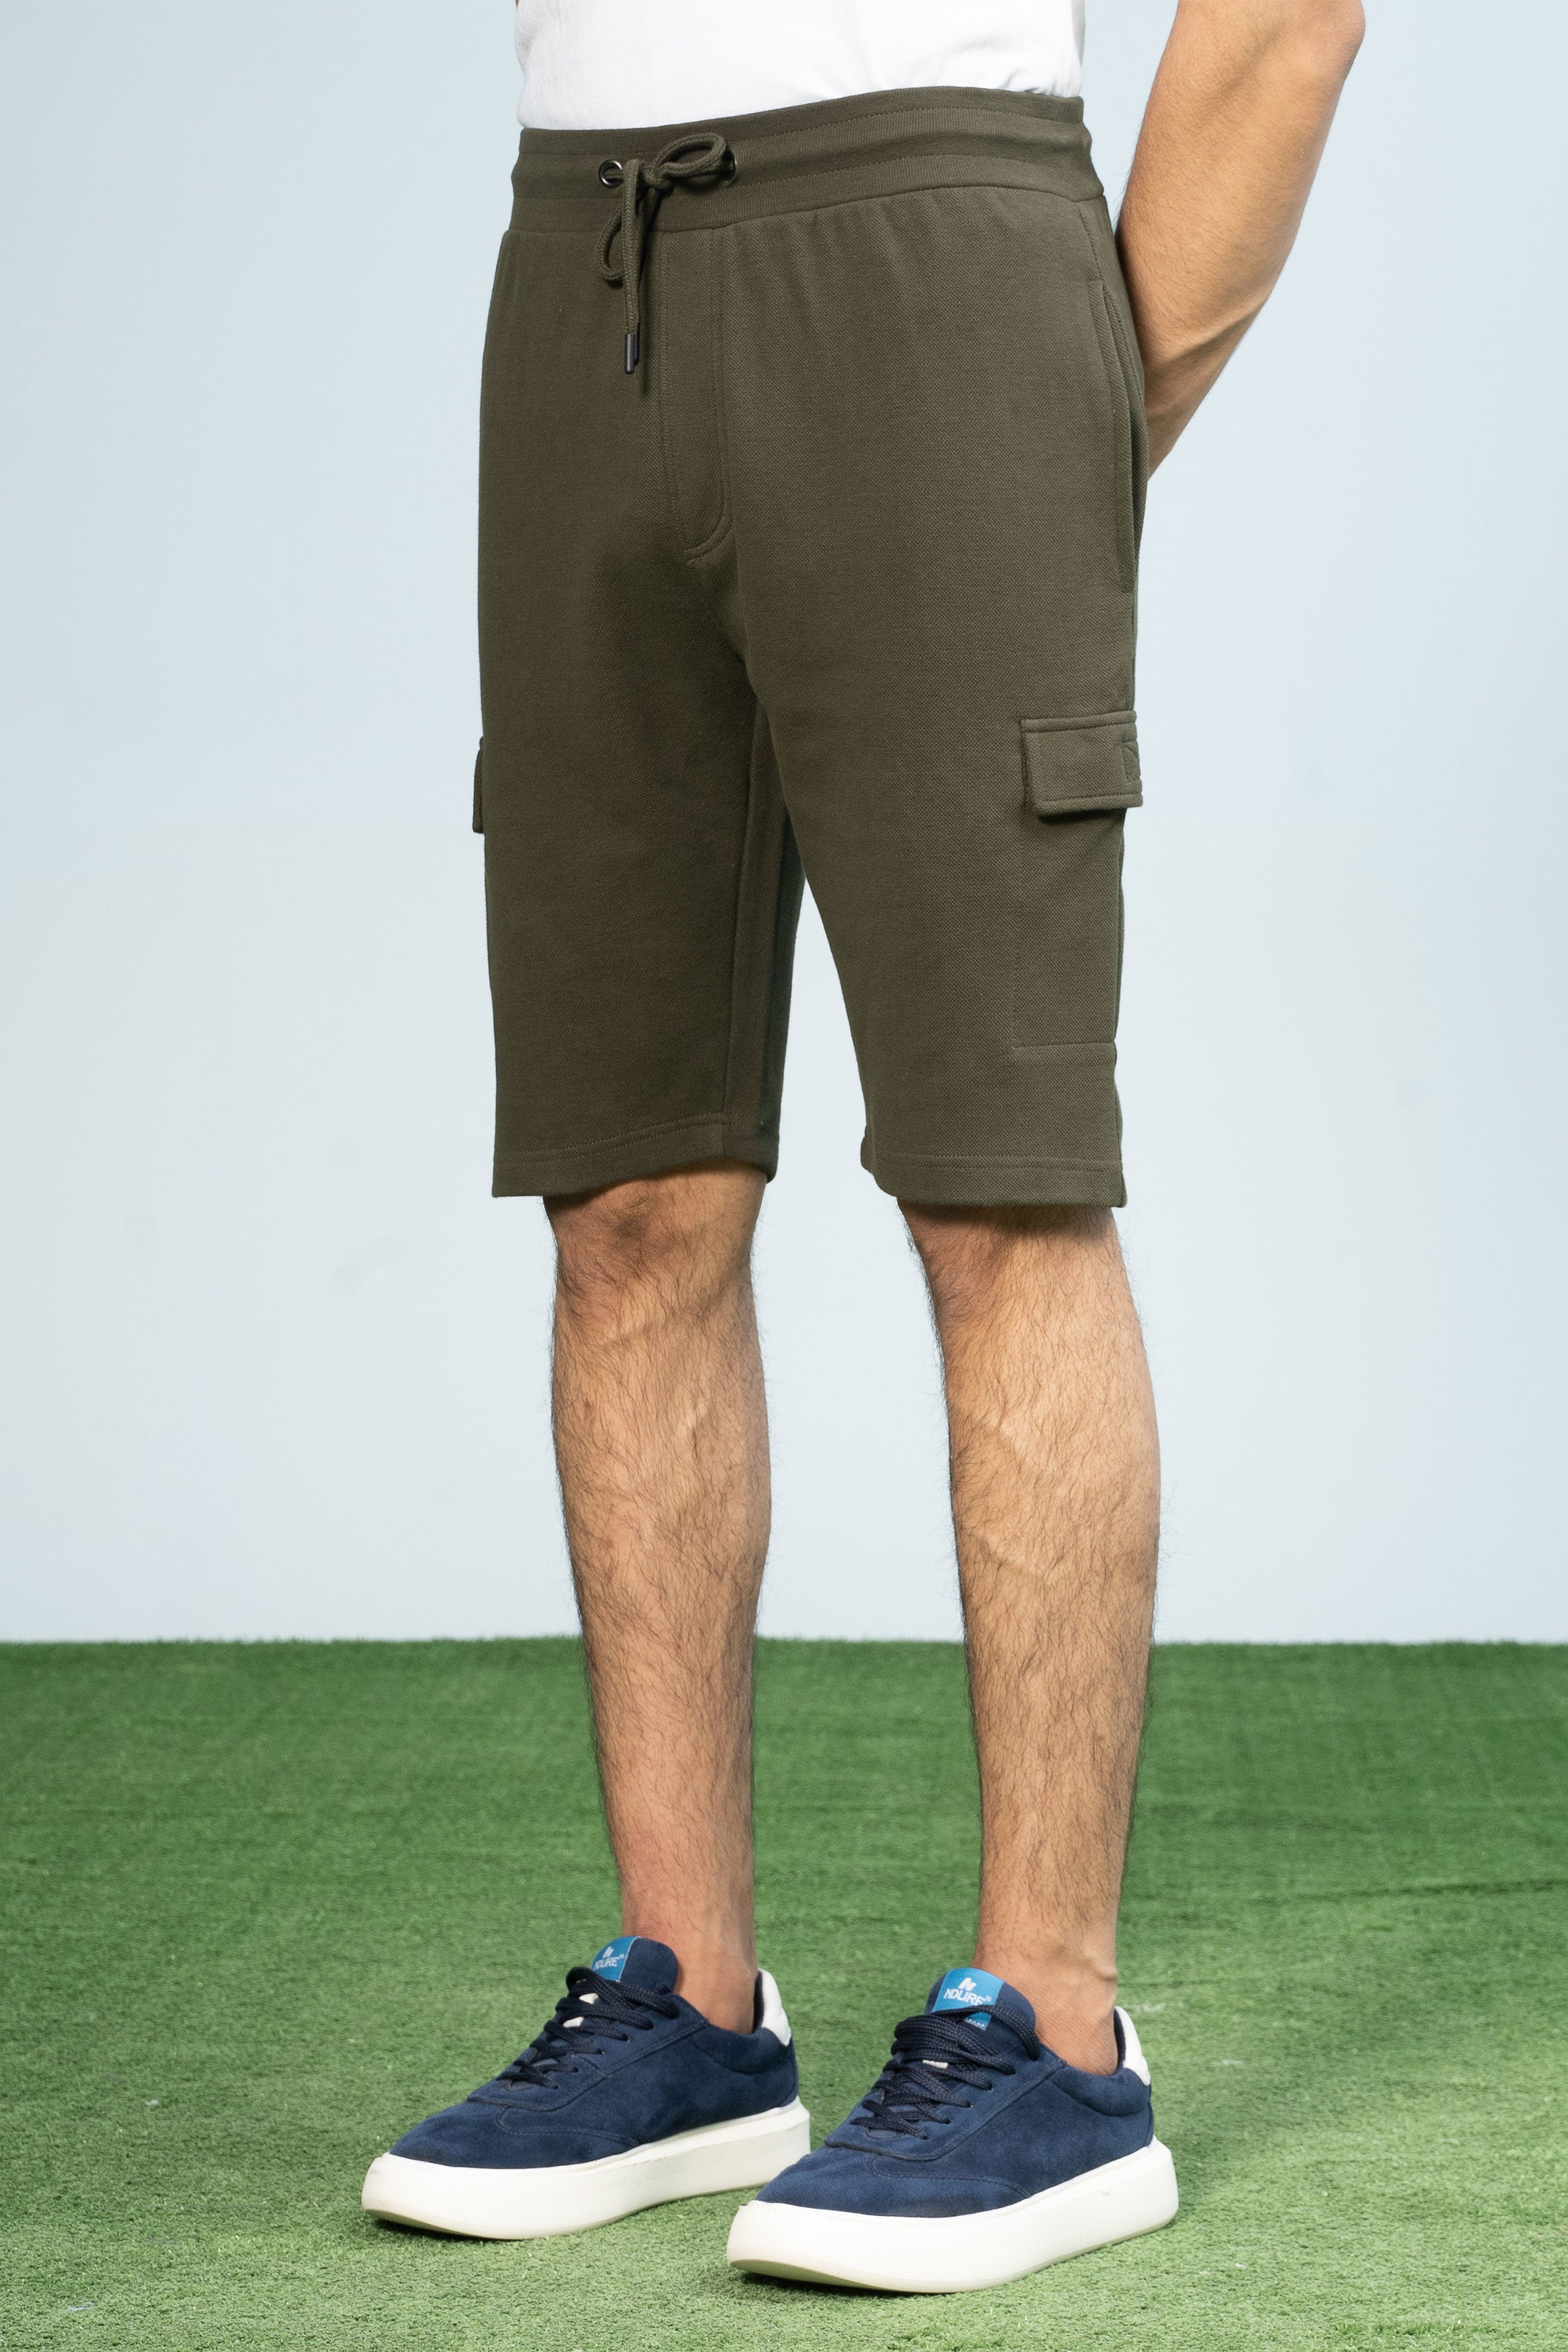 PIQUE TERRY CARGO SHORTS REGULAR FIT OLIVE - Charcoal Clothing